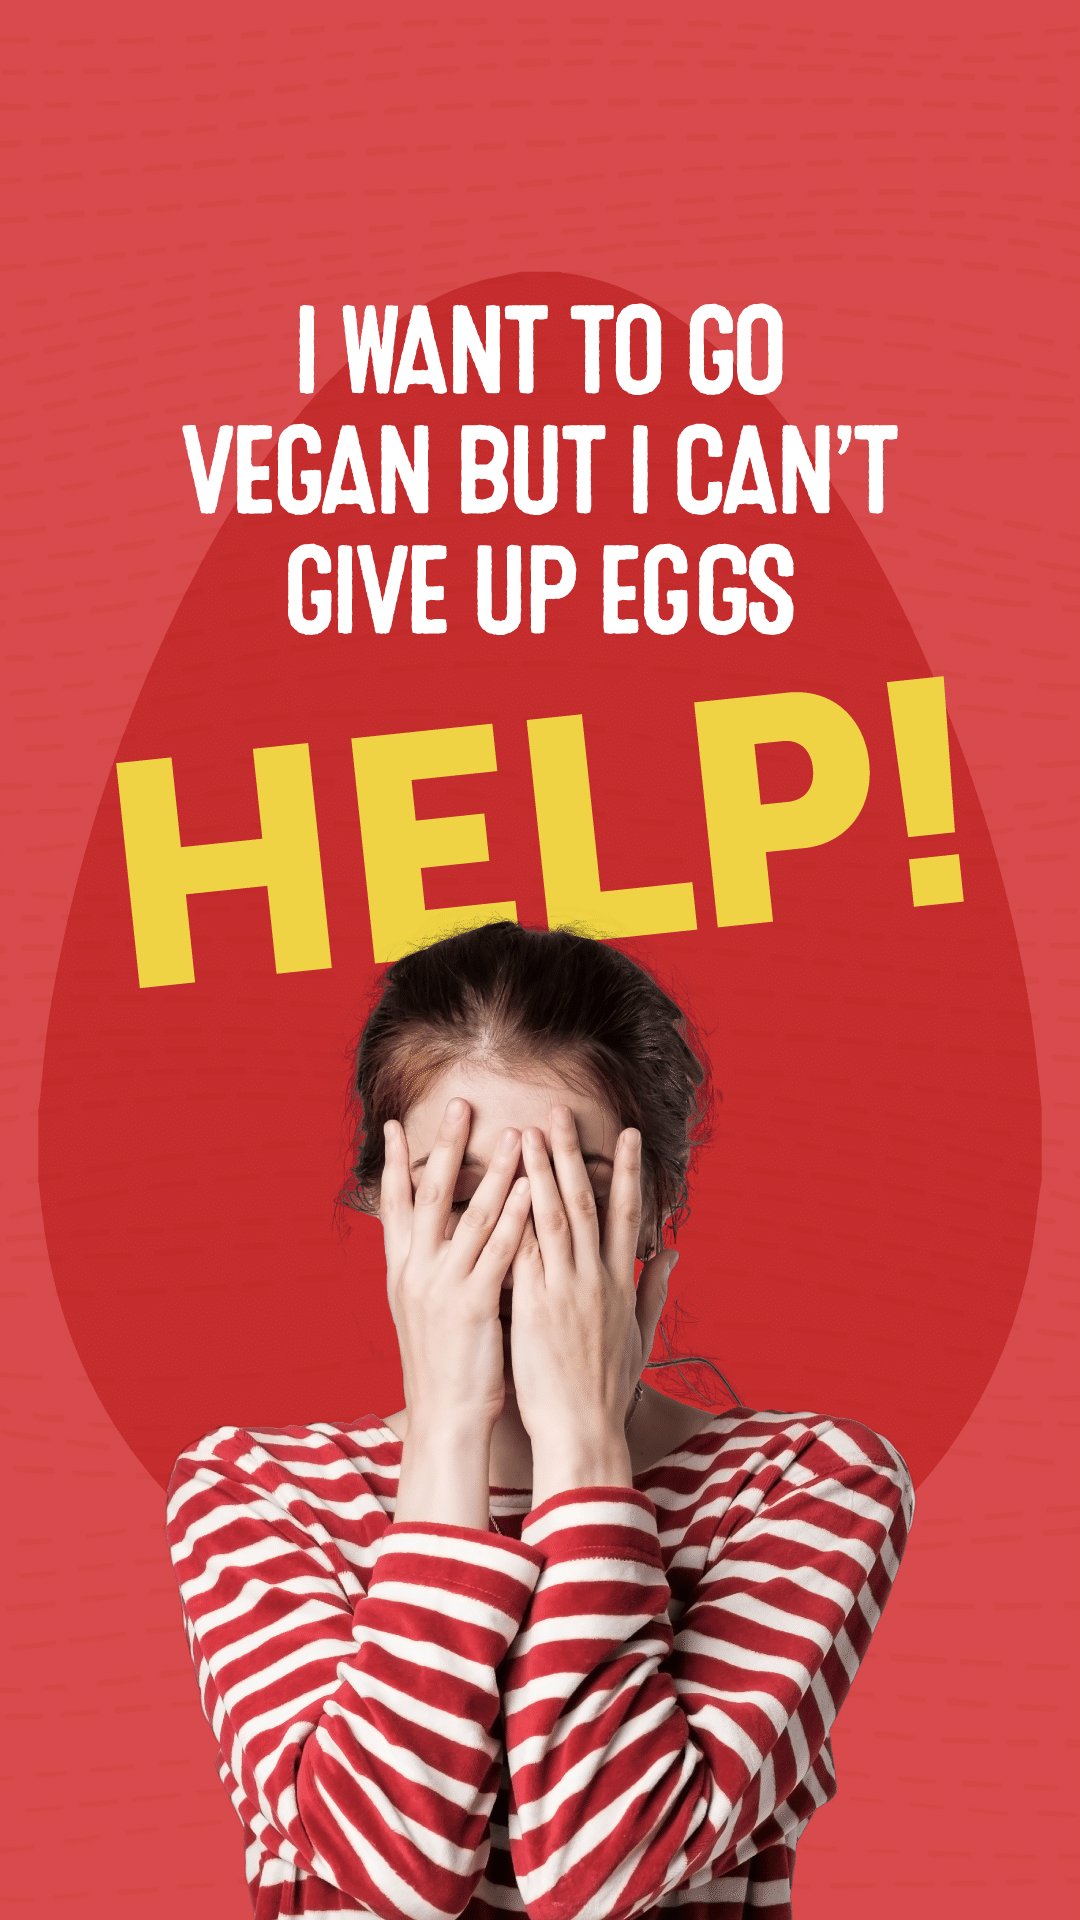 I Want to Go Vegan but I Can’t Give Up Eggs… Help!